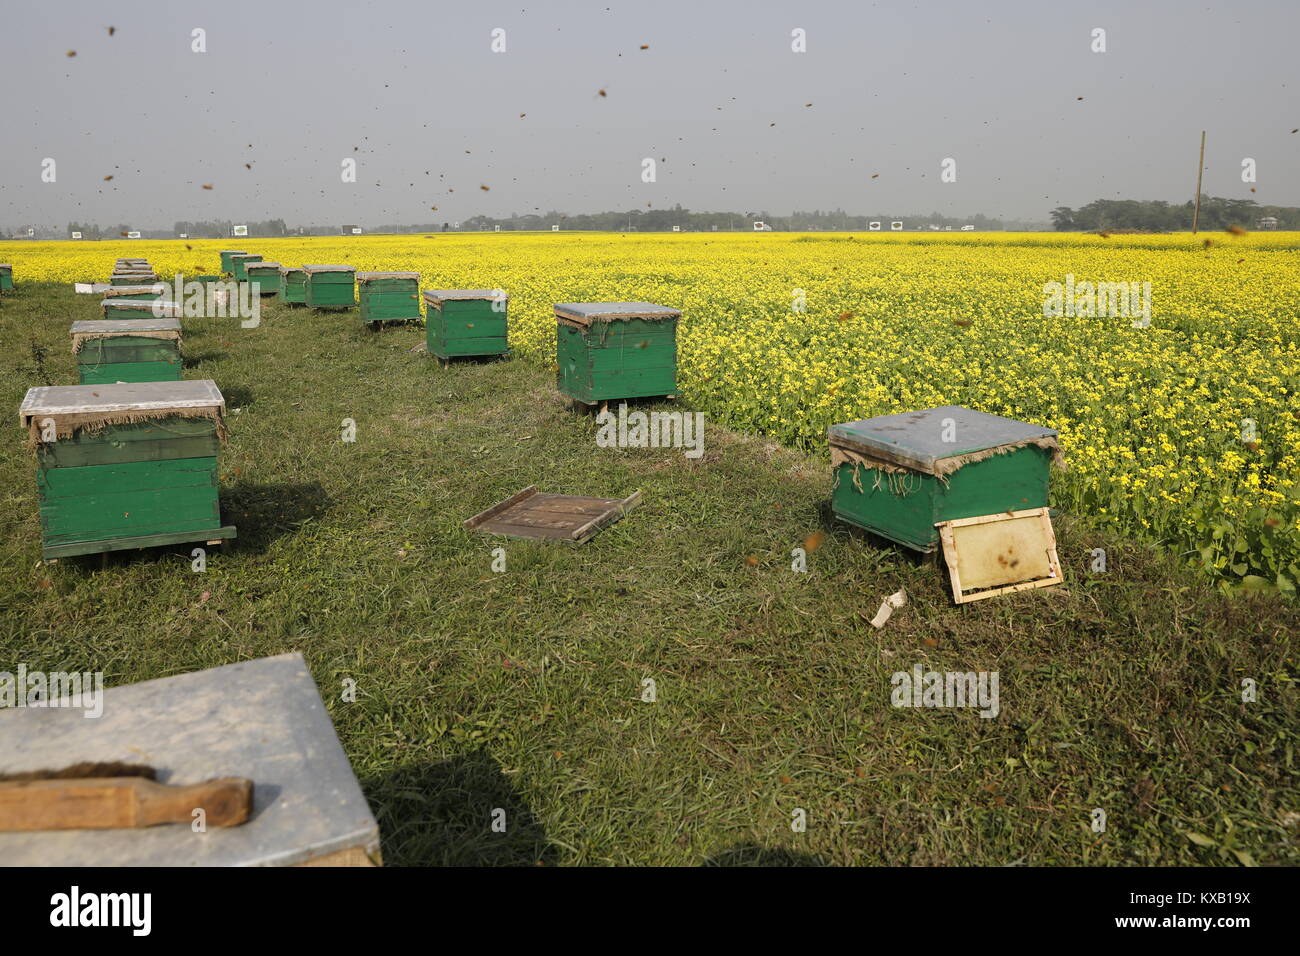 Farmers set up specially prepared box around mustard field in Munshigonj, Bangladesh, on January 09, 2018. According to the Bangladesh Institute of Apiculture (BIA), around 25 thousand cultivators including 1,000 commercial agriculturists produce at least 1500 tons of good quality honey a year across the country. Stock Photo